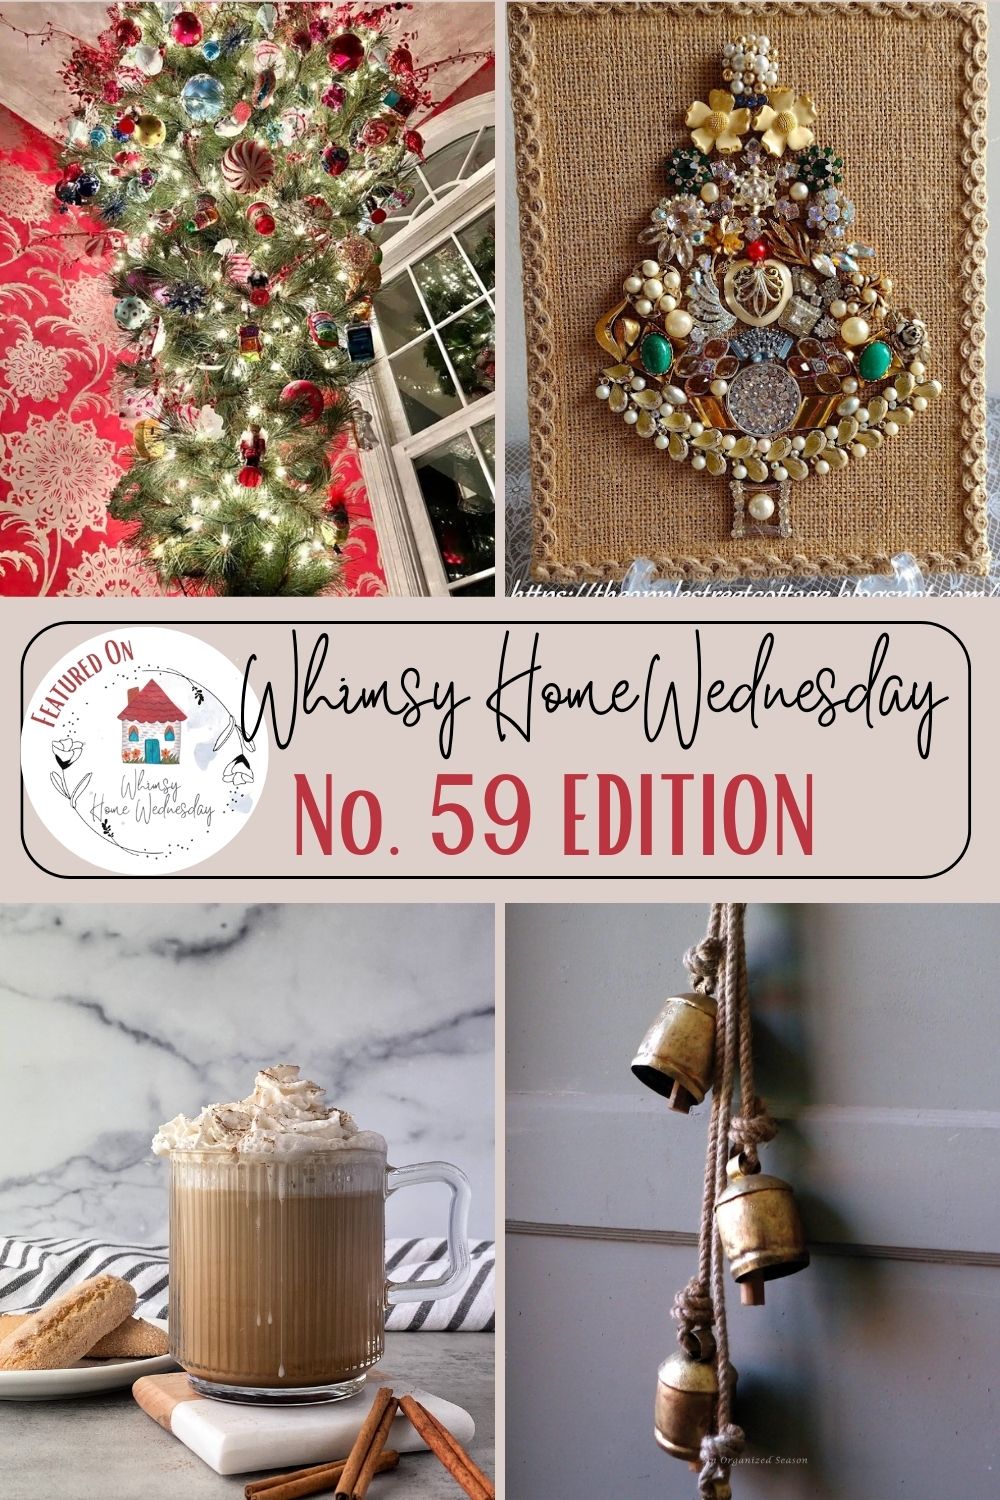 Join us on Whimsy Home Wednesday Blog Link Party No. 59 and see host projects, the features from the previous week and link up your posts!